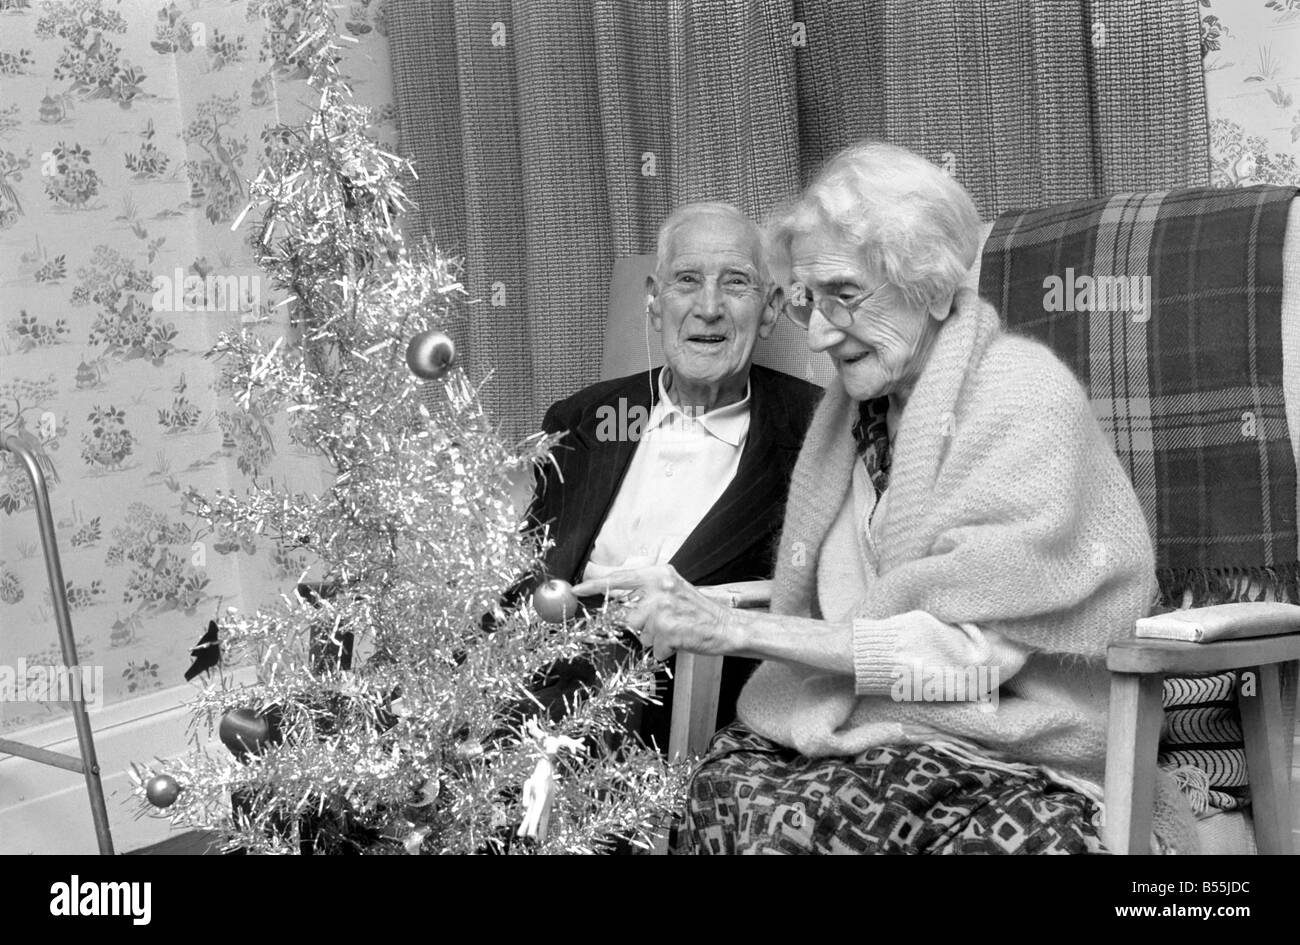 Love and Romance: Elderly Couple. Mr. David Harrington, 99, and his wife, Elizabeth, 100, celebrate their 76th wedding anniversary at the Mayesbrook Old Folks Home, Bevean Ave, Barking, on Christmas Day. December 1969 Z12290 Stock Photo